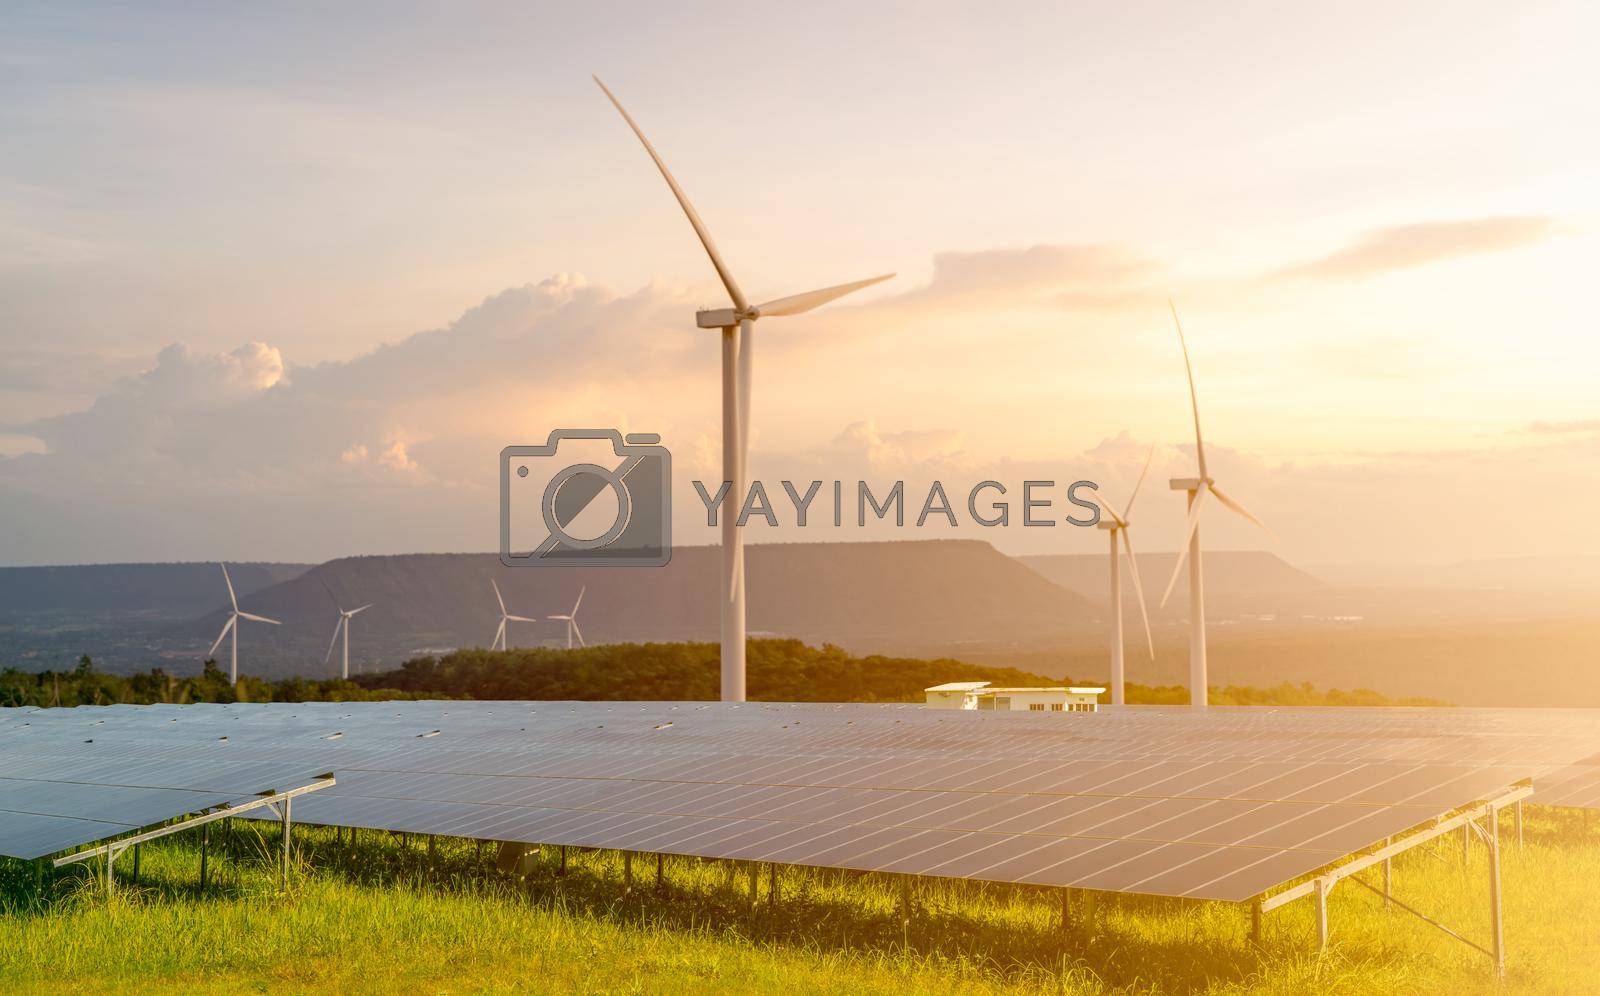 Royalty free image of Sustainable energy. Solar and wind turbines farm. Sustainable resources. Solar, wind power. Renewable energy. Sustainable development. Photovoltaic panel. Green energy. Alternative electricity source. by Fahroni